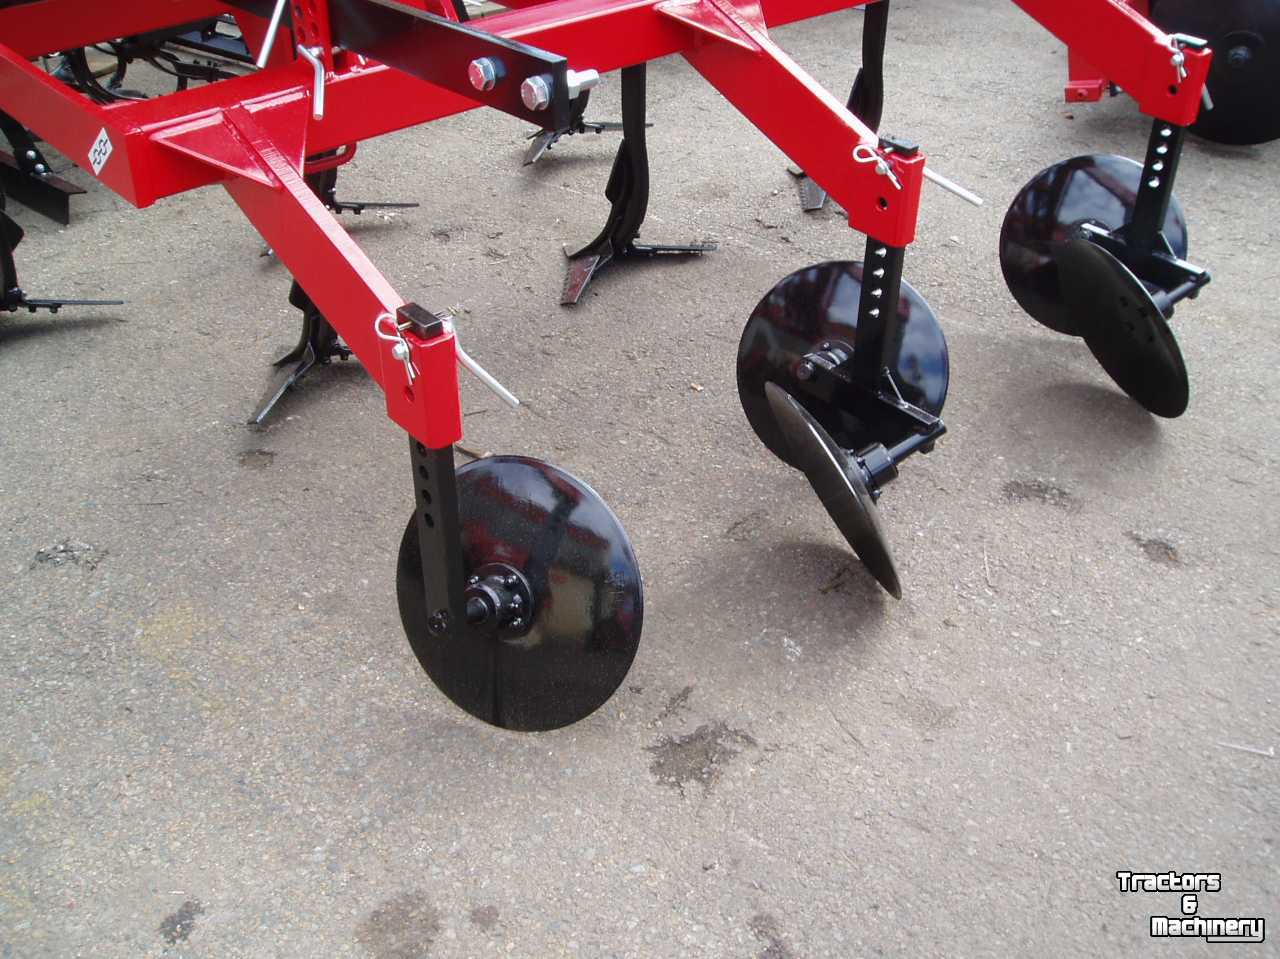 Cultivator SMS RK260